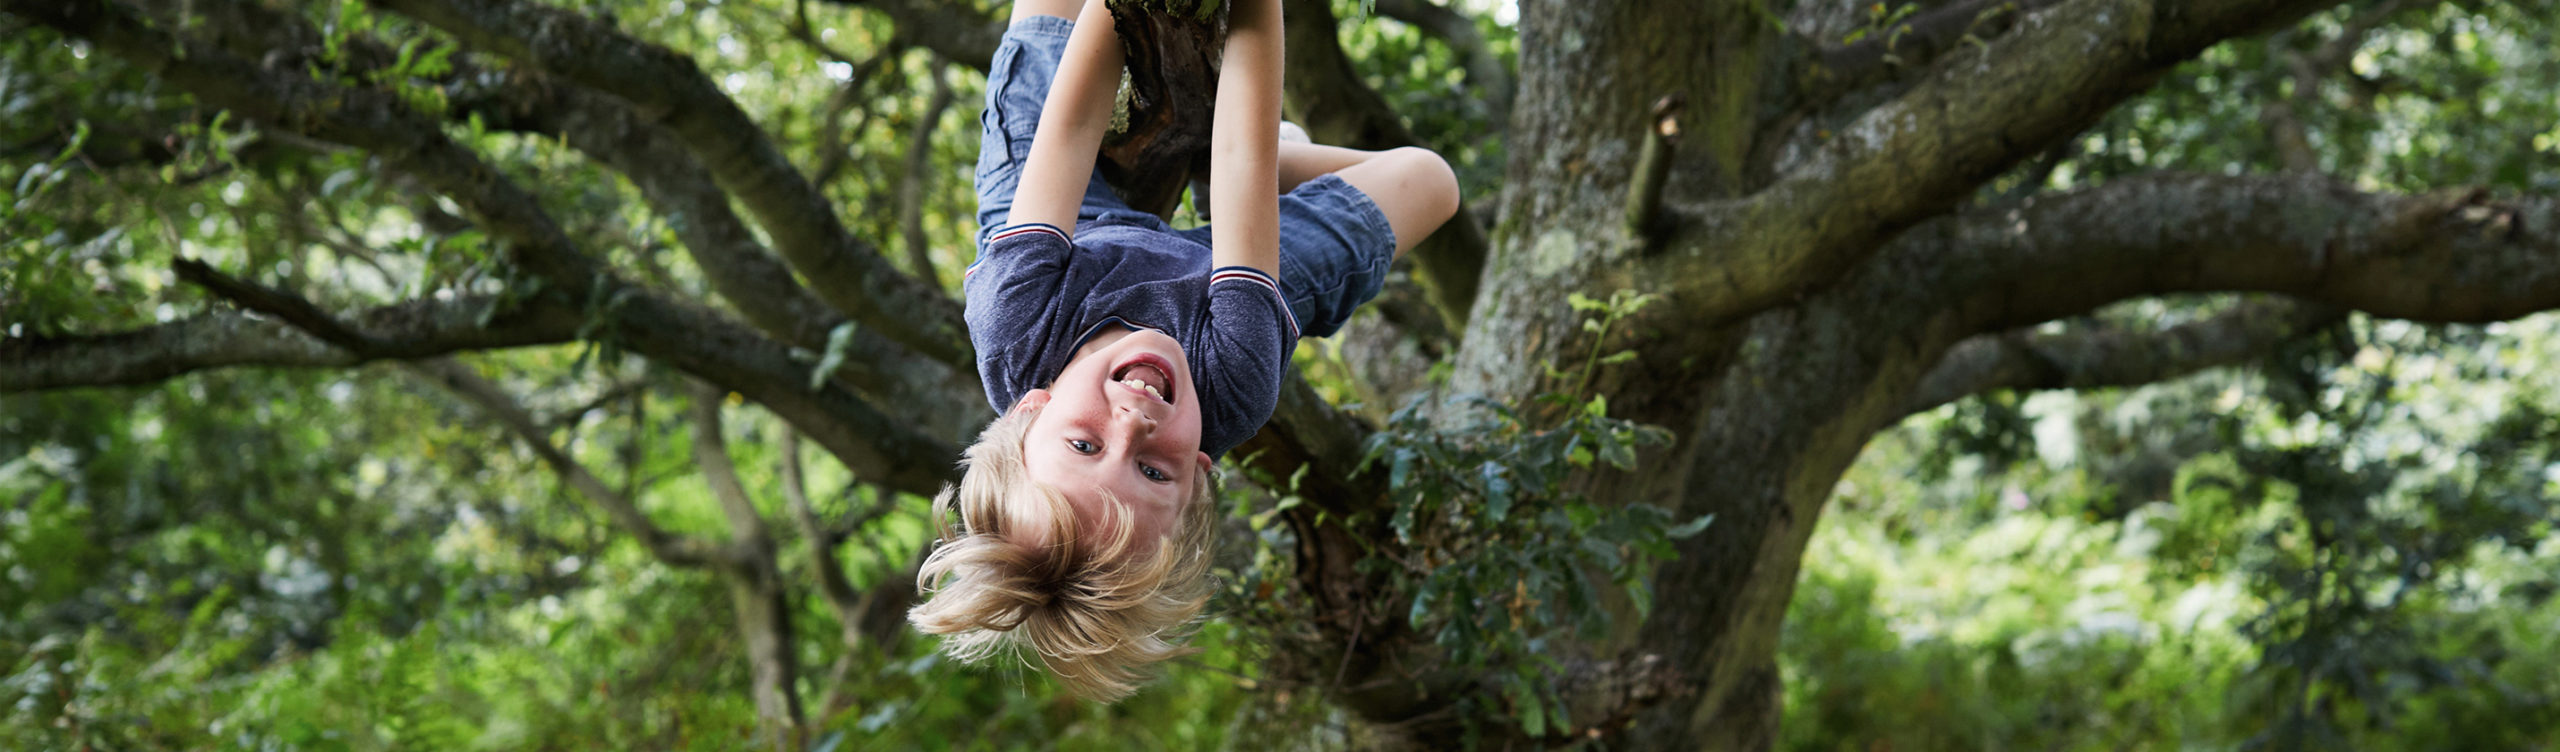 Young boy playing hanging upside down in tree